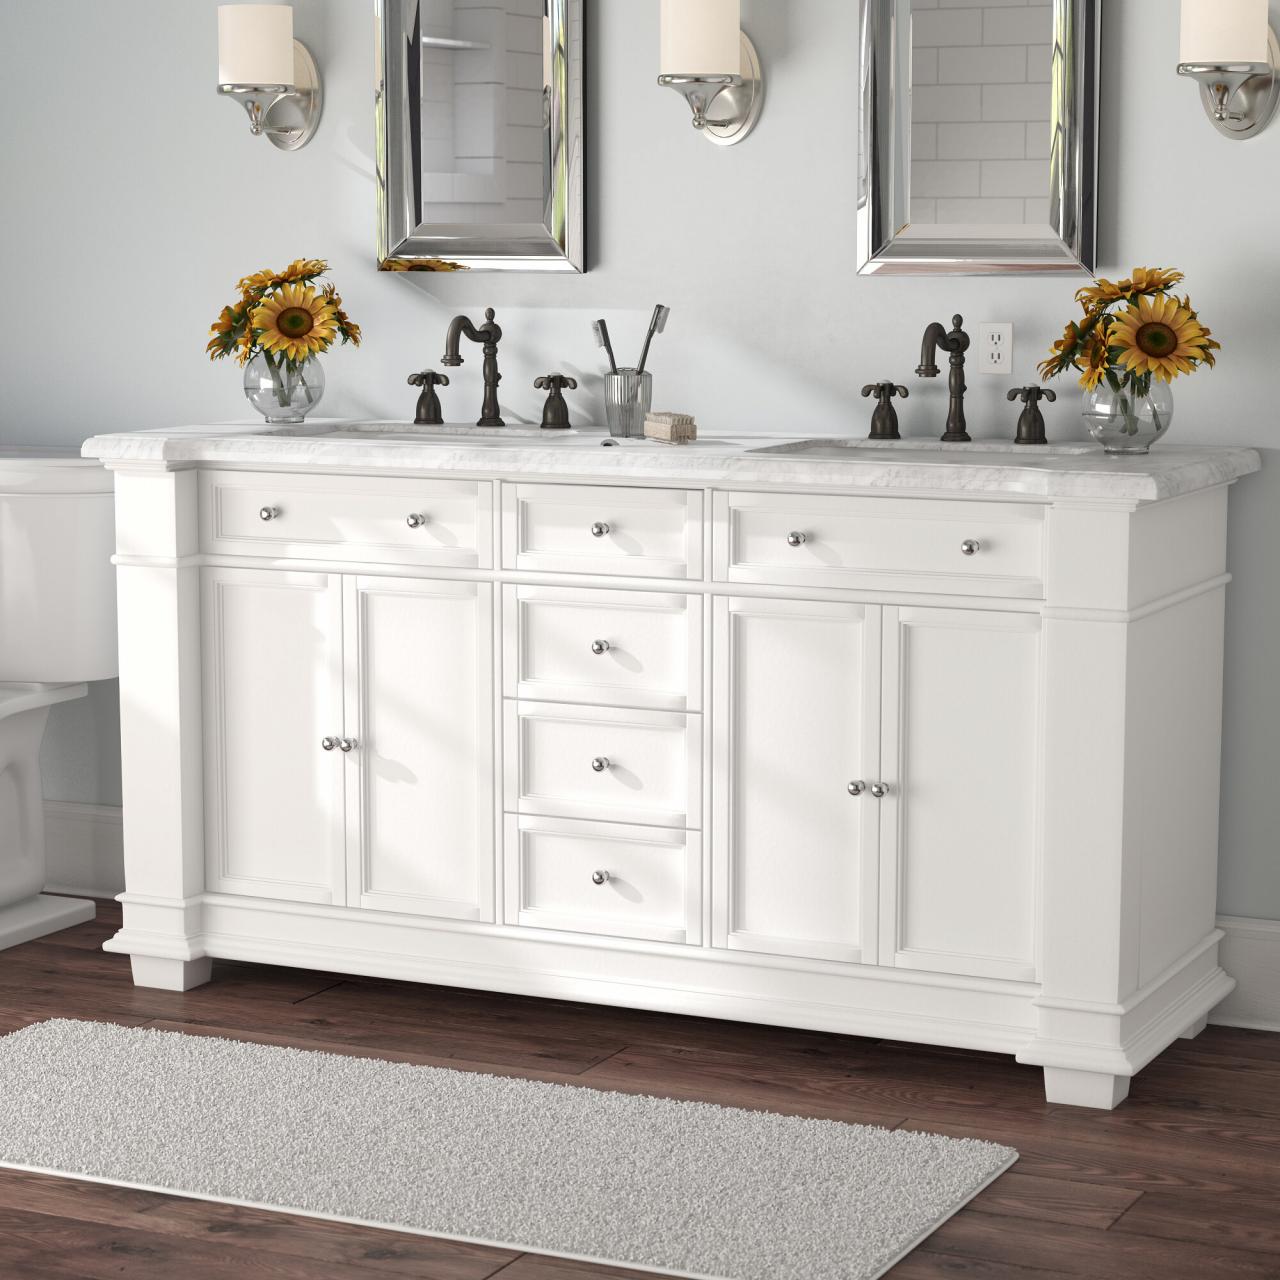 Bathroom Cabinets With Double Sinks – Semis Online